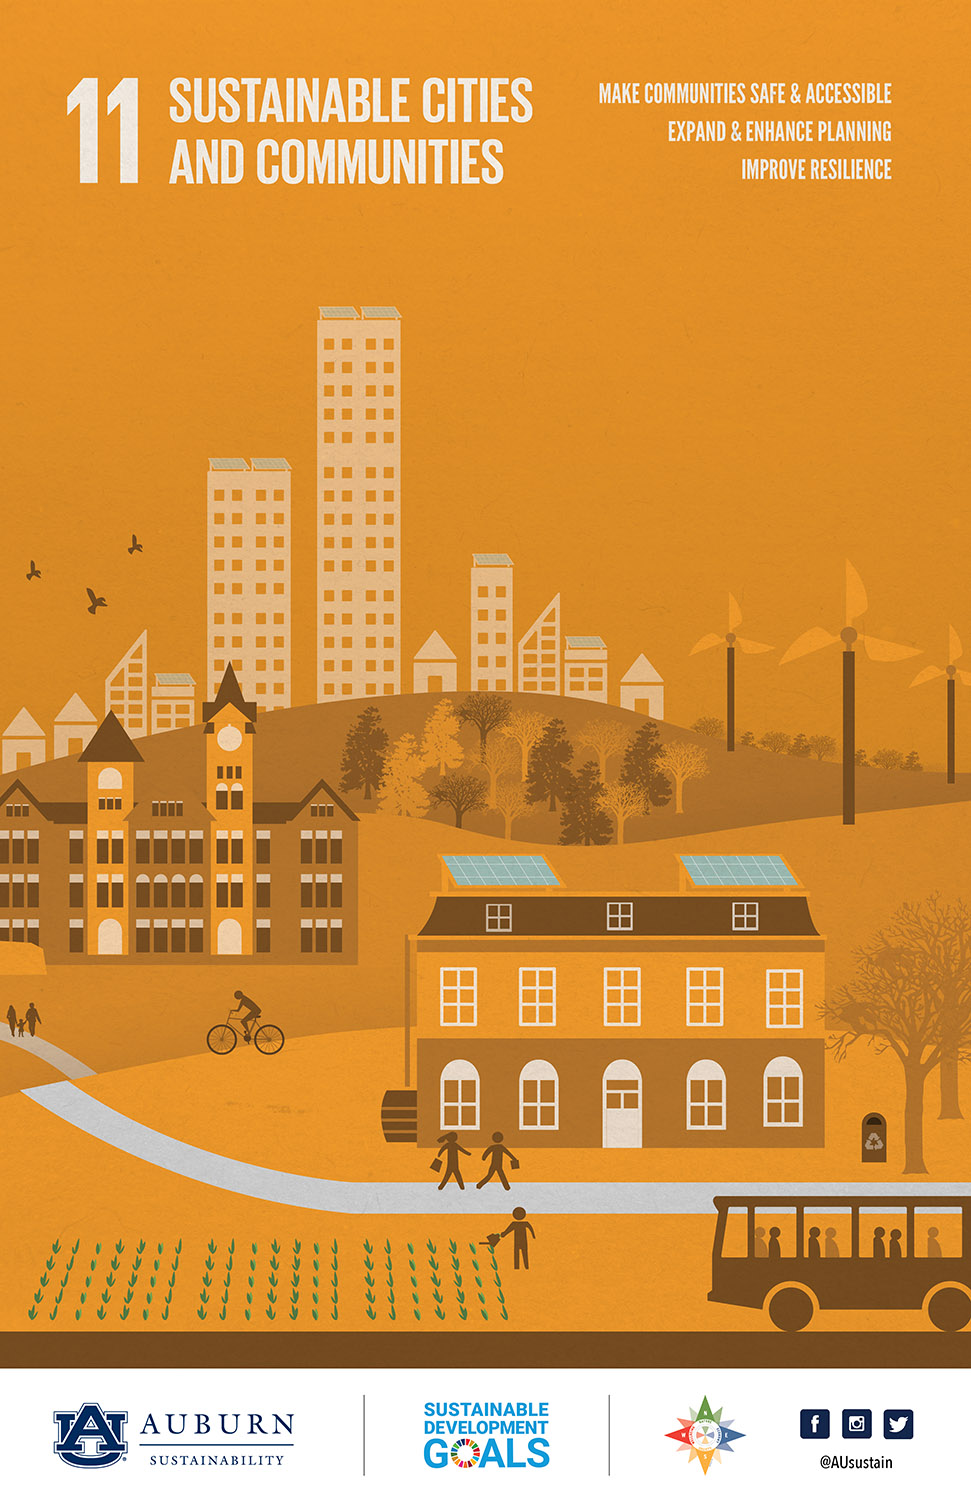 Sustainable Development Goal 11 Poster illustration: Sustainable Cities And Communities. Goals include: Make communities safe and accessible, expand and enhance planning, and improve resilience.